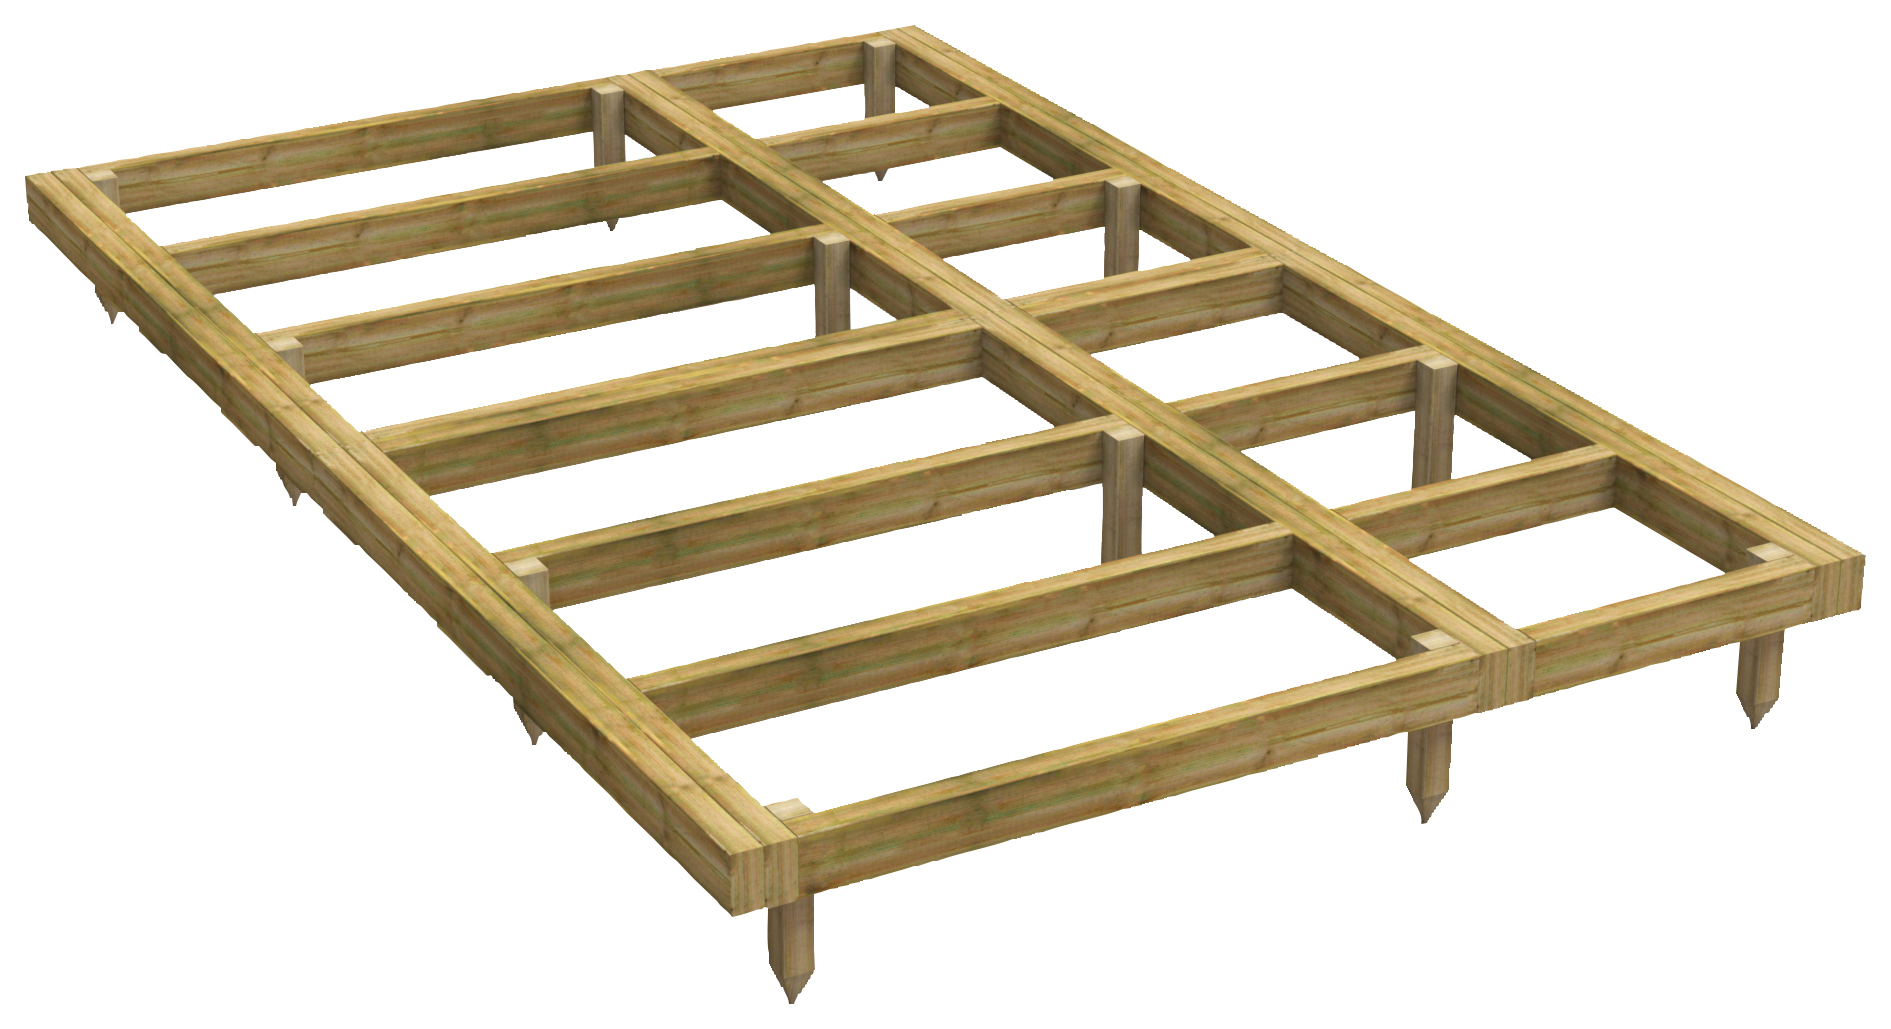 Image of Power Sheds 8 x 10ft Pressure Treated Garden Building Base Kit